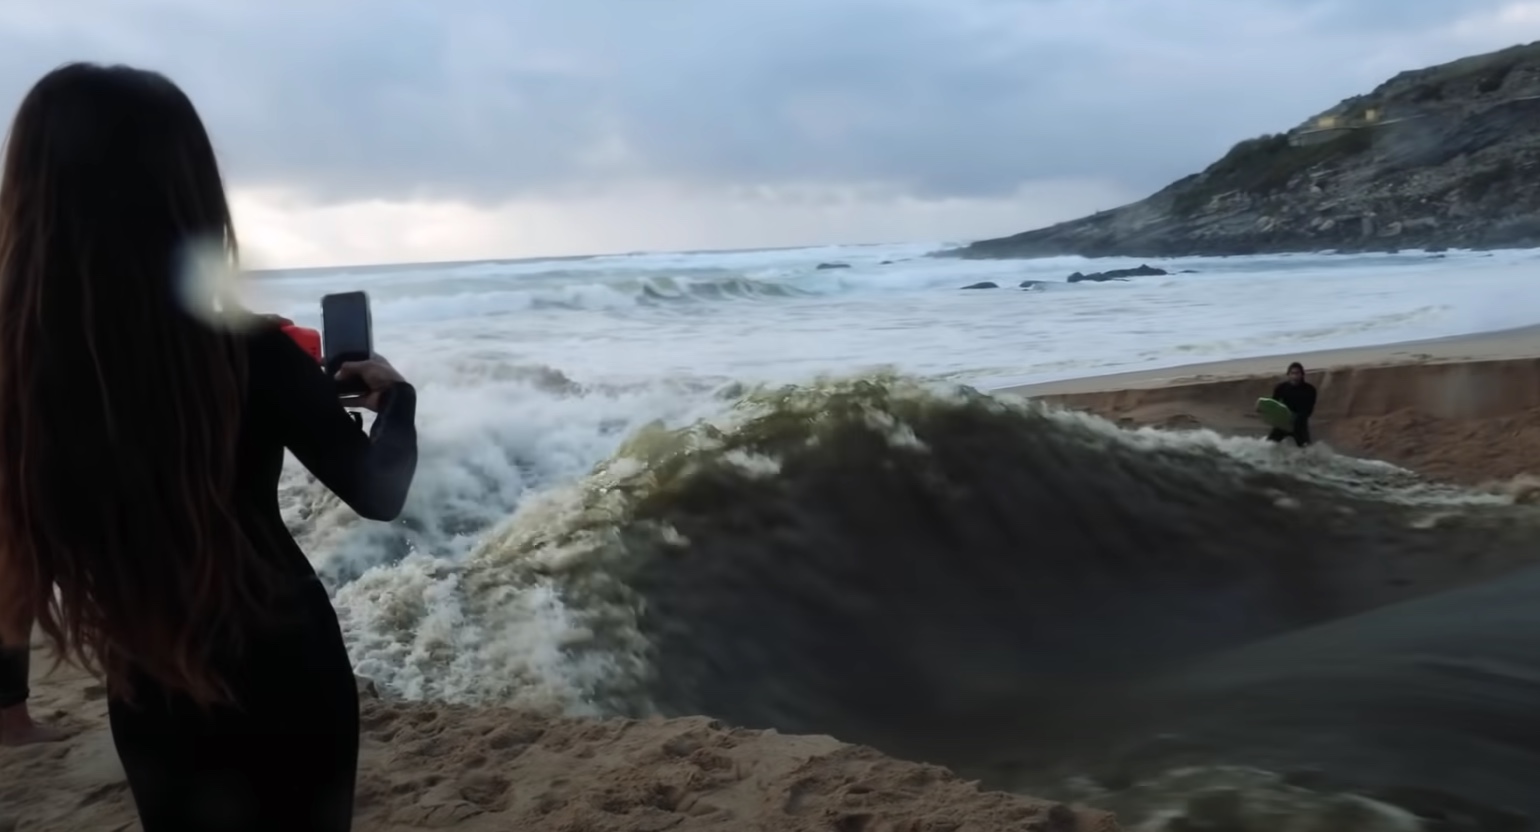 Hawaiian Surfers Create "The World's Largest River Wave"